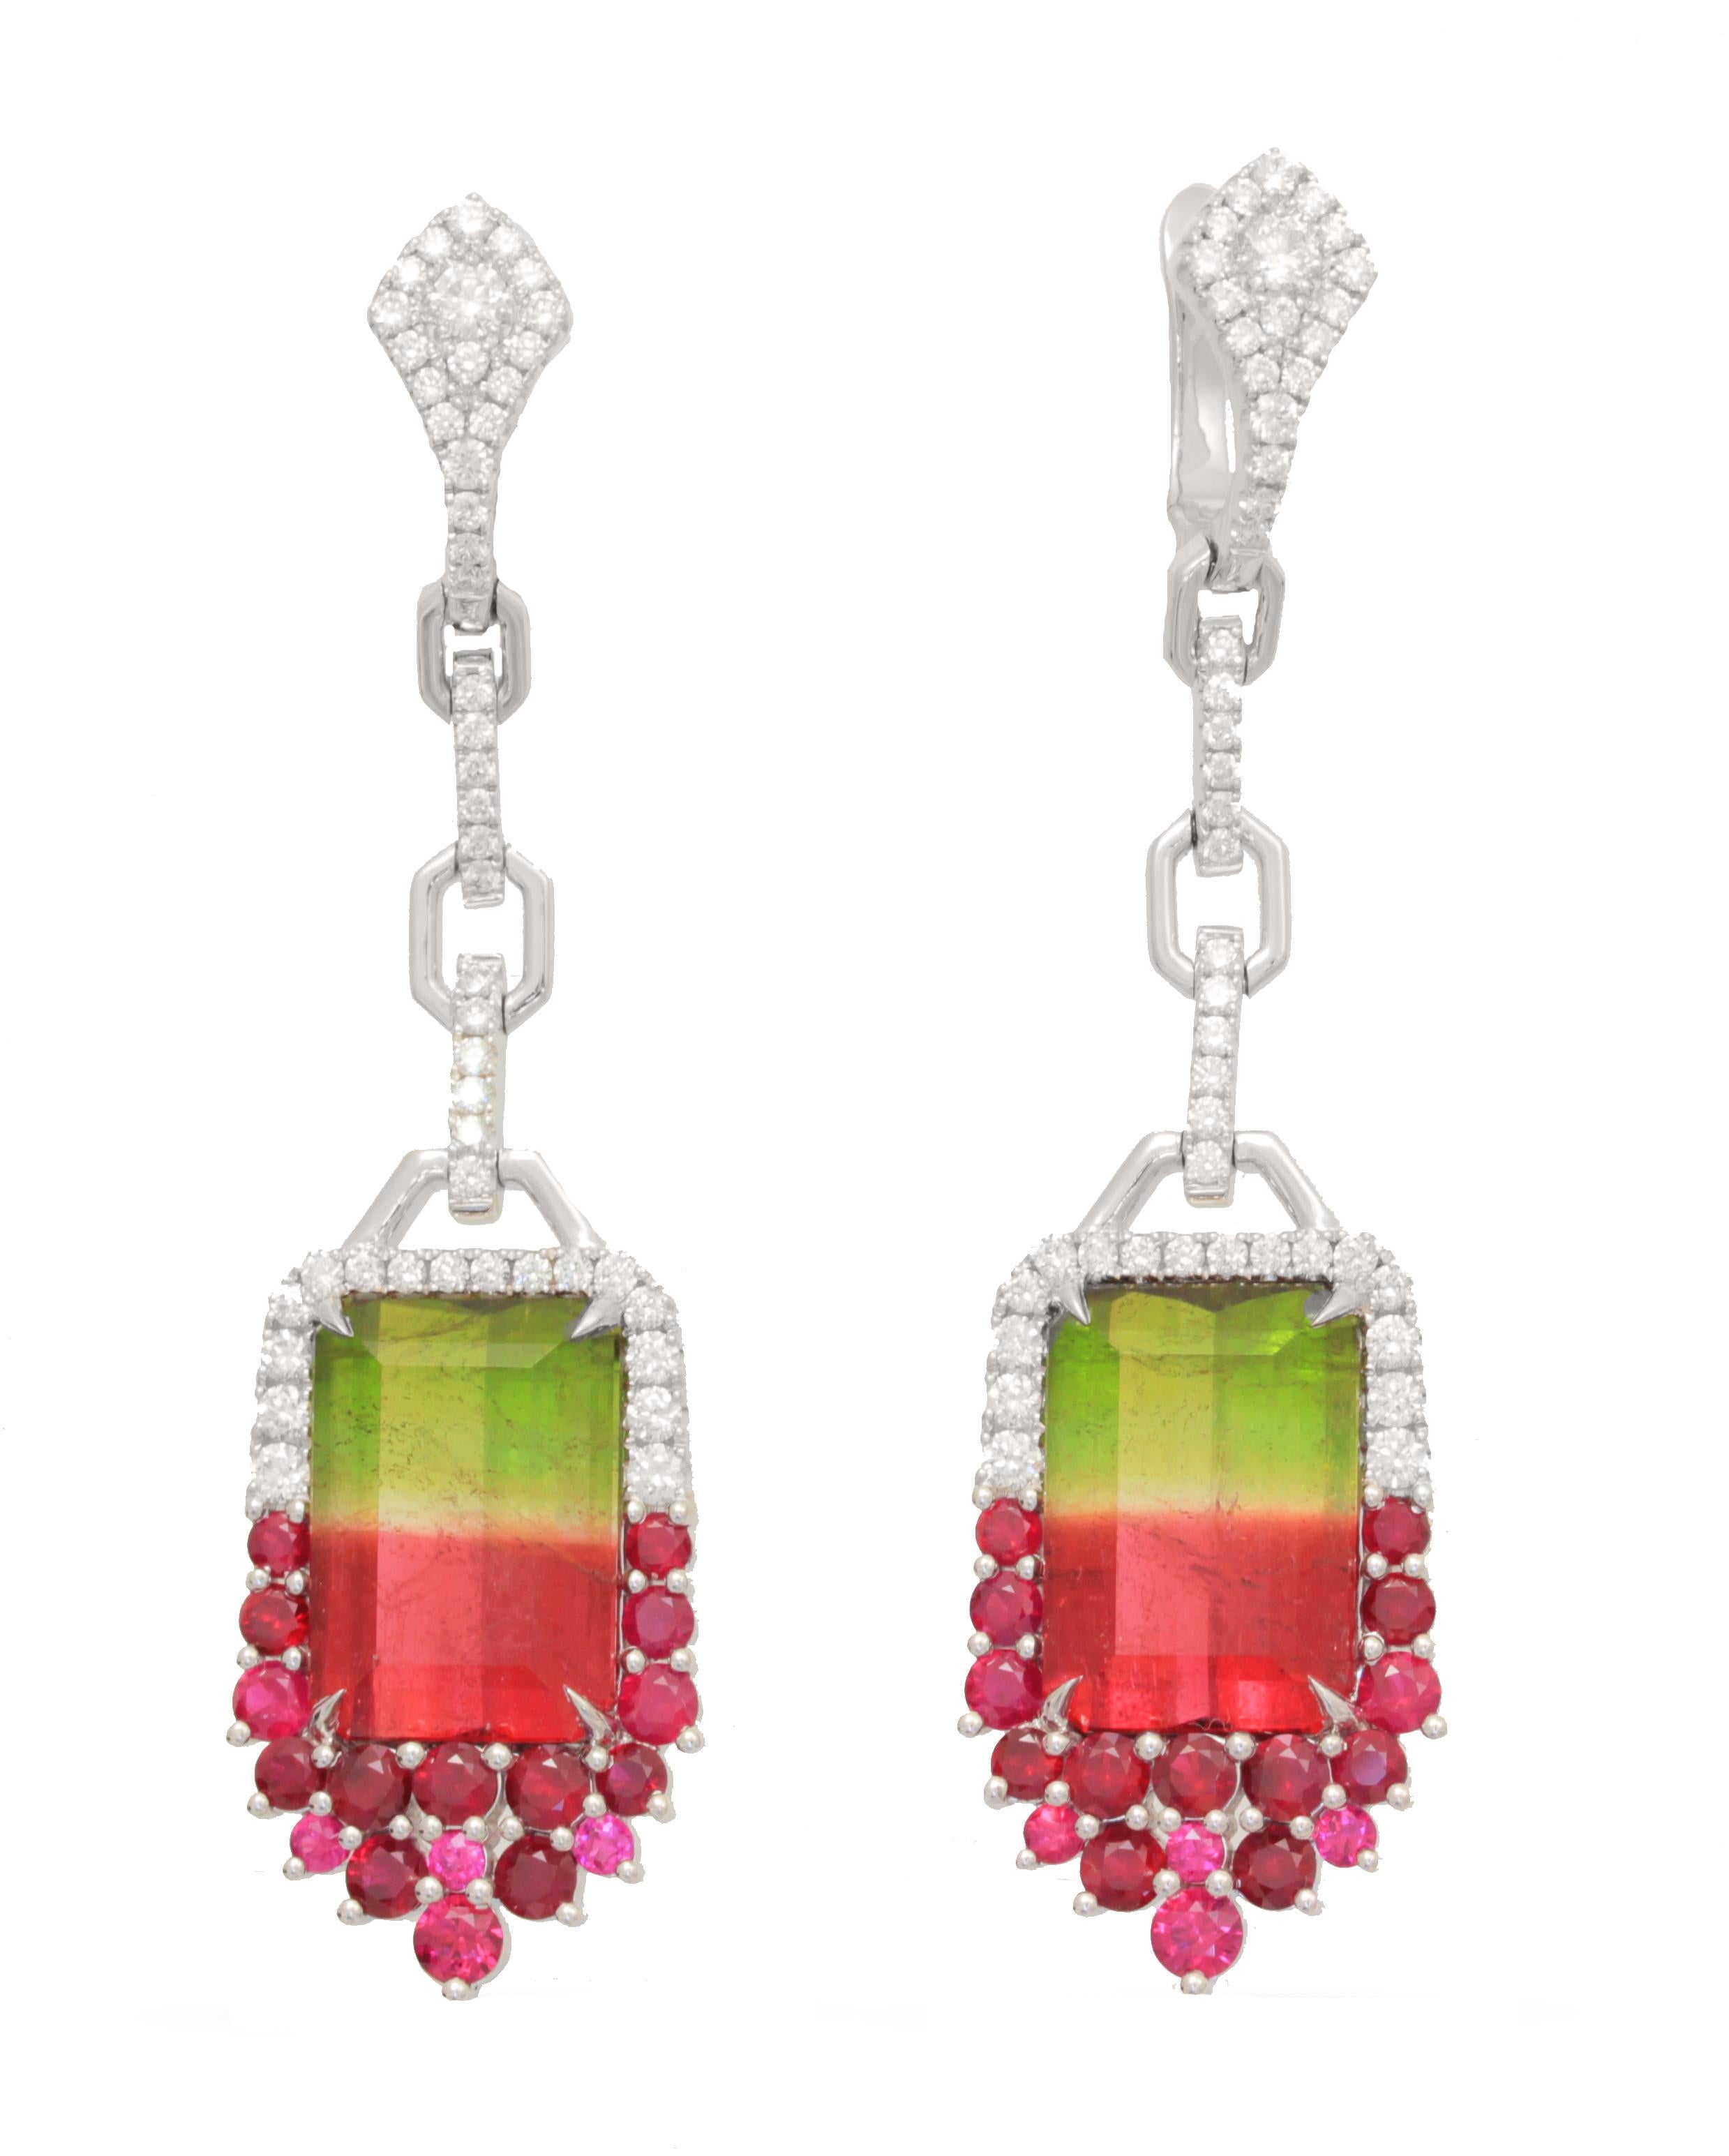 Contemporary Frederic Sage 15.78 Carat Watermelon Tourmaline Diamond Ruby Earrings For Sale